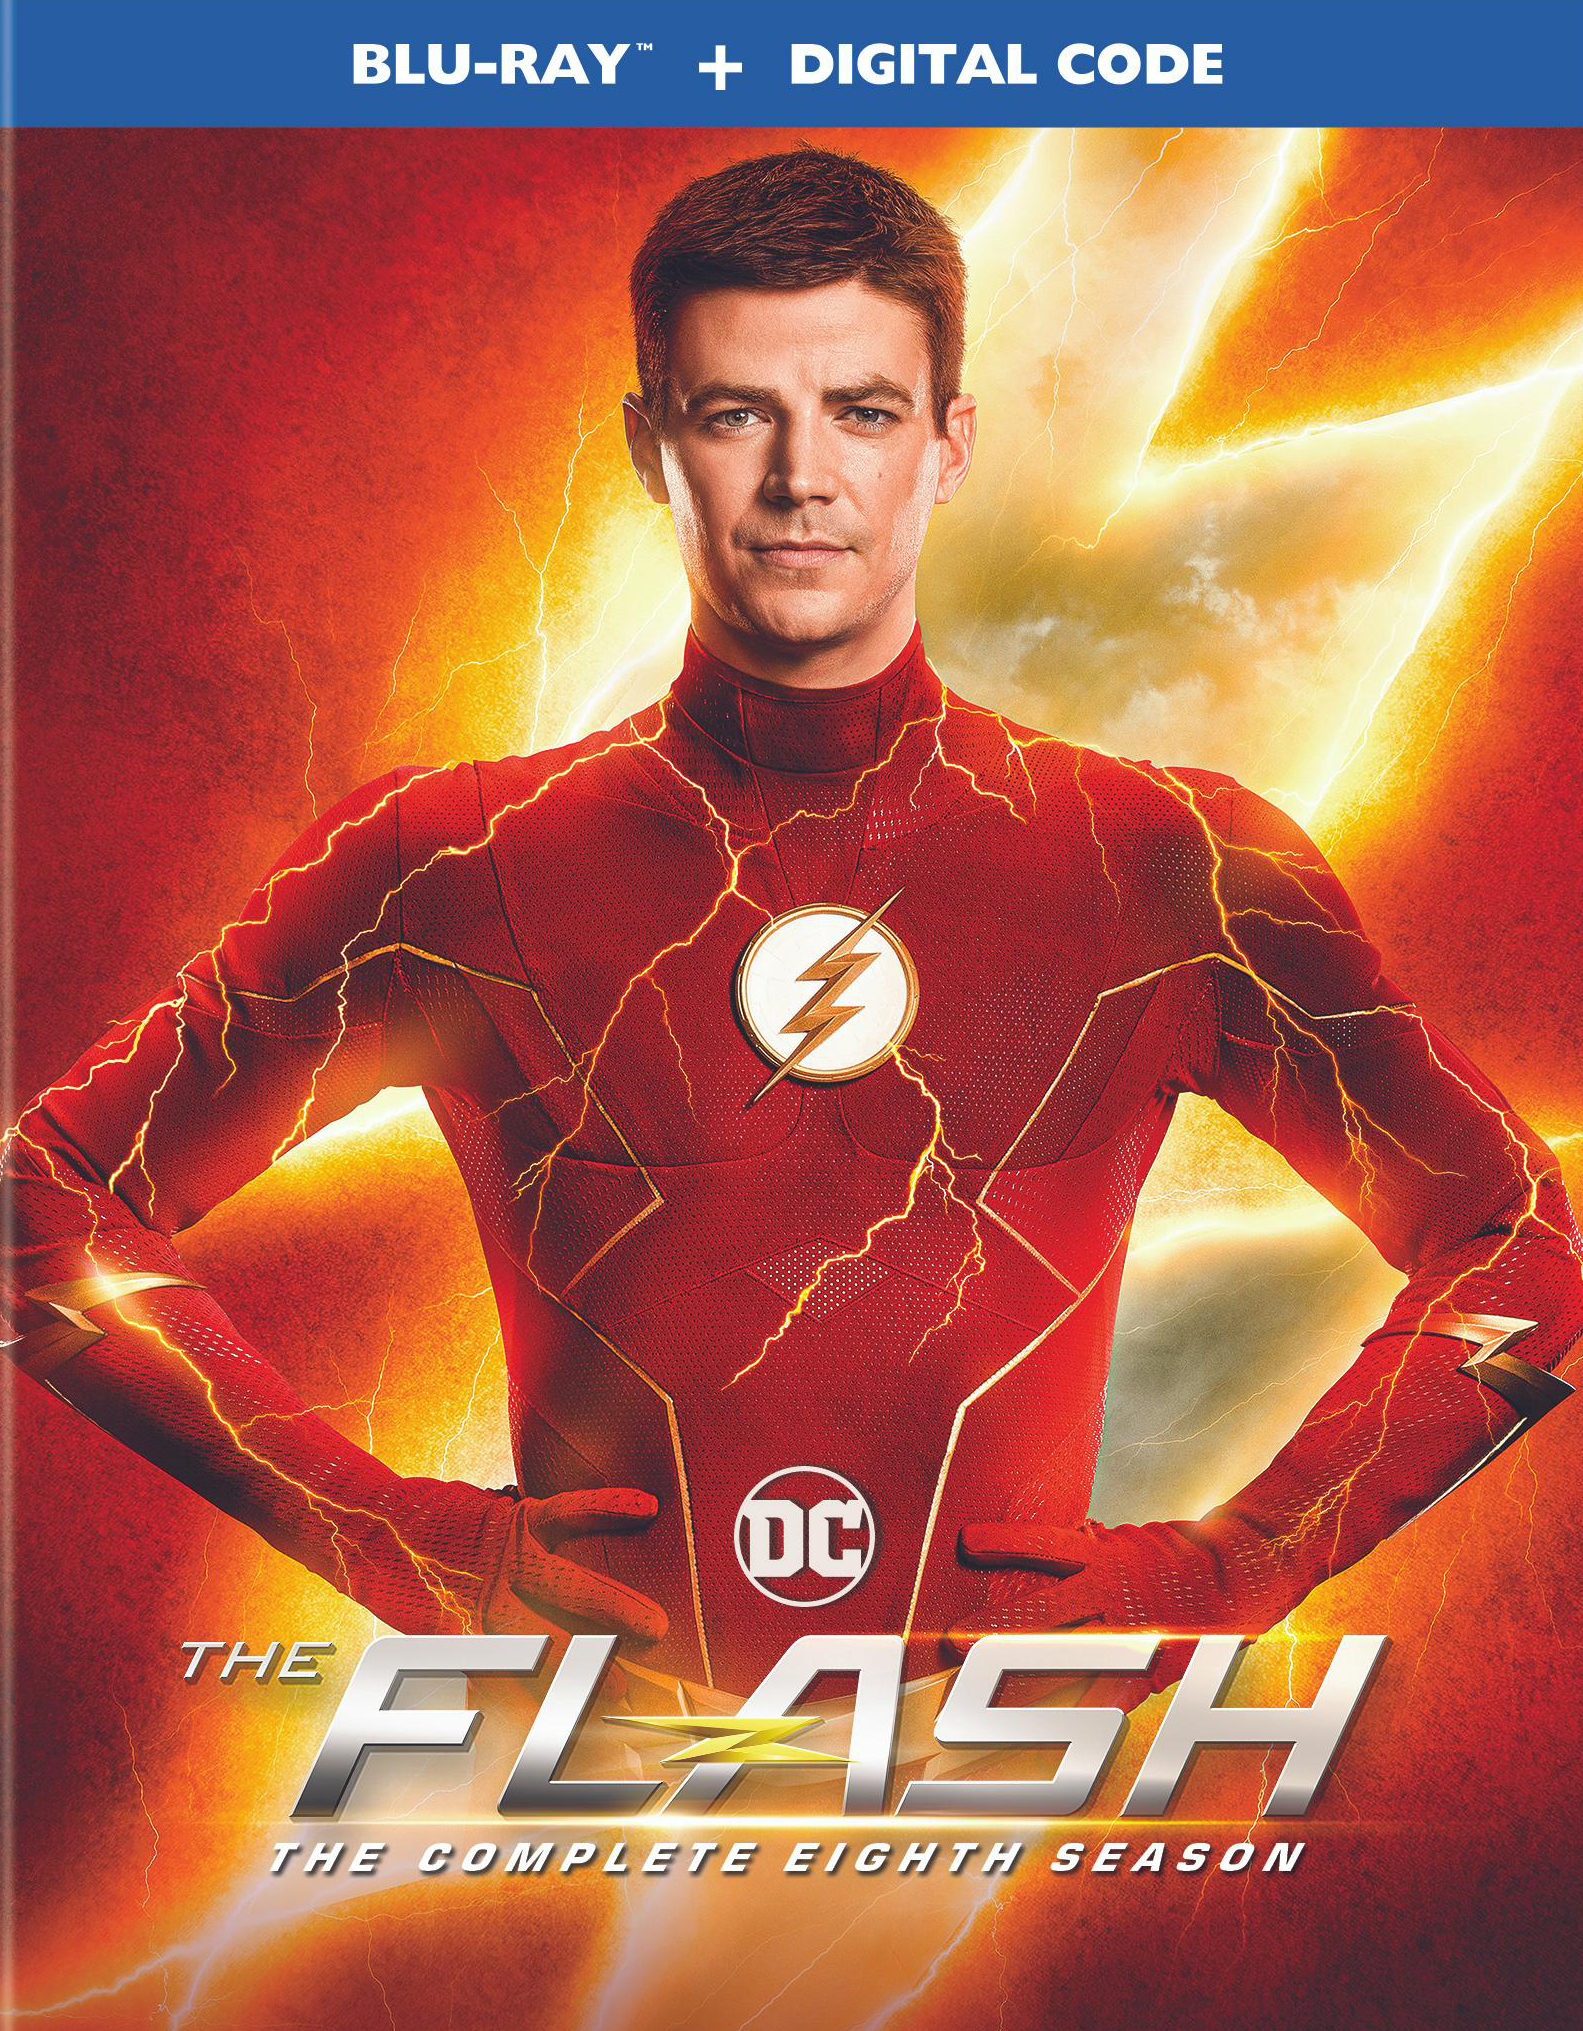 The Flash: The Complete Eighth Season [Blu-ray] - Best Buy